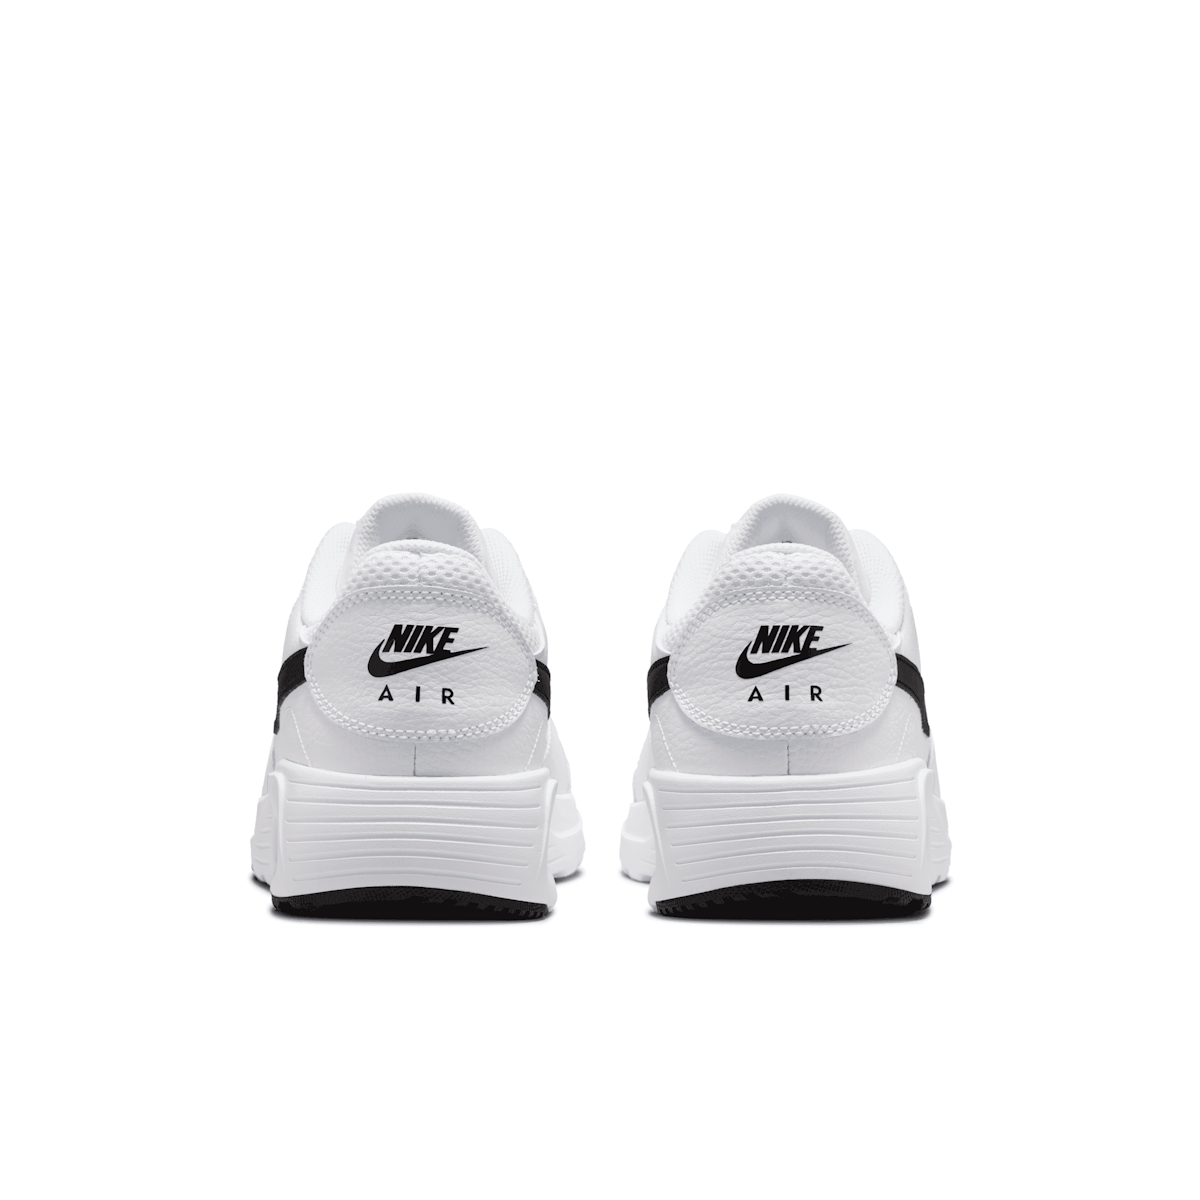 Nike Air Max SC Release CW4555-102 White Date - Raffles Black and